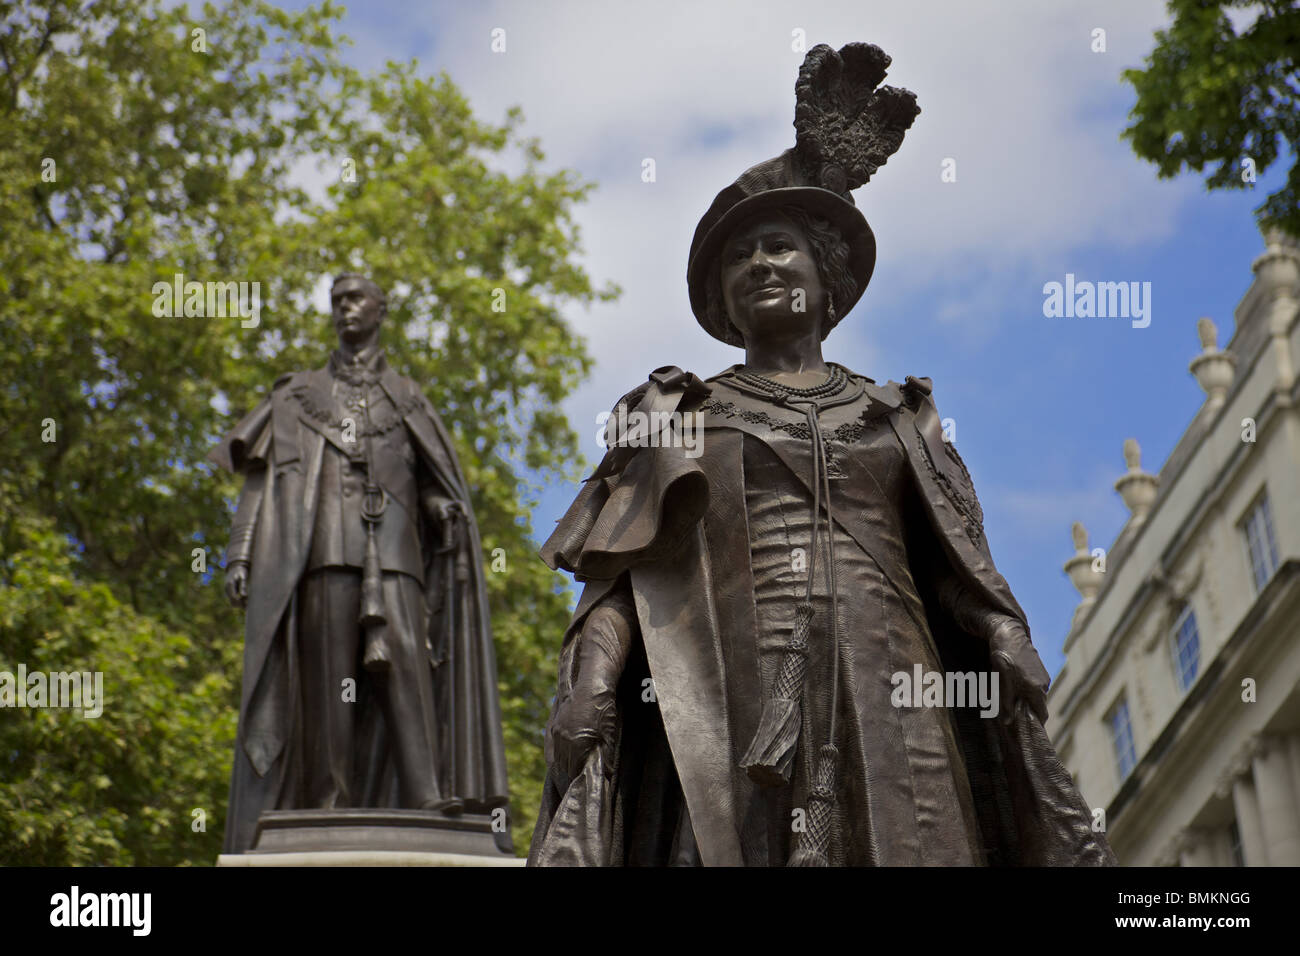 Statue of Queen Elizabeth the queen mother and King George V1 in the Mall, London Stock Photo